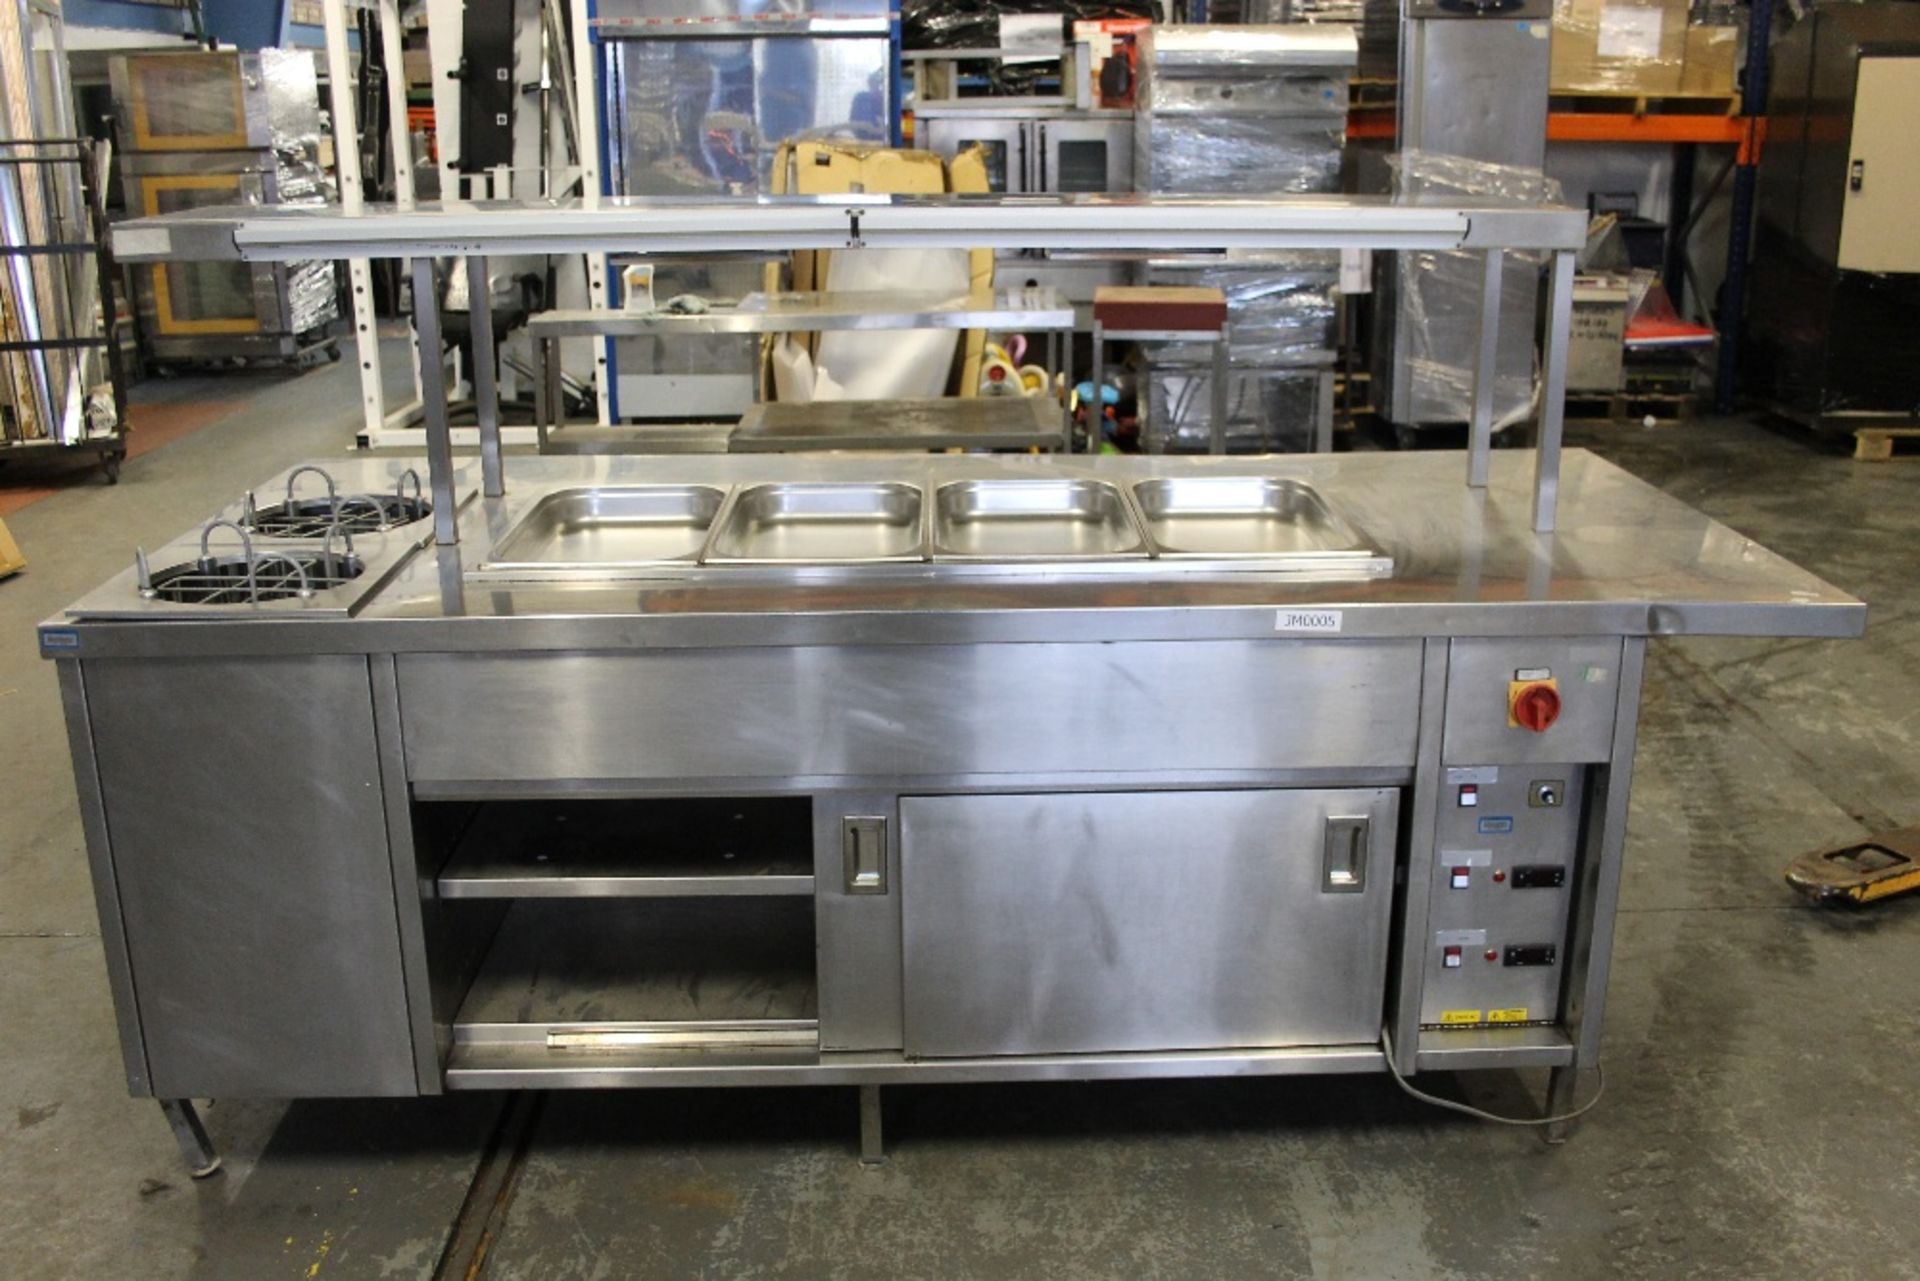 Large Buffet Unit with 4 Large Gastro Pans – 2 Plate Warmers + Under Storage & Ticket Grab -1ph - Image 3 of 3